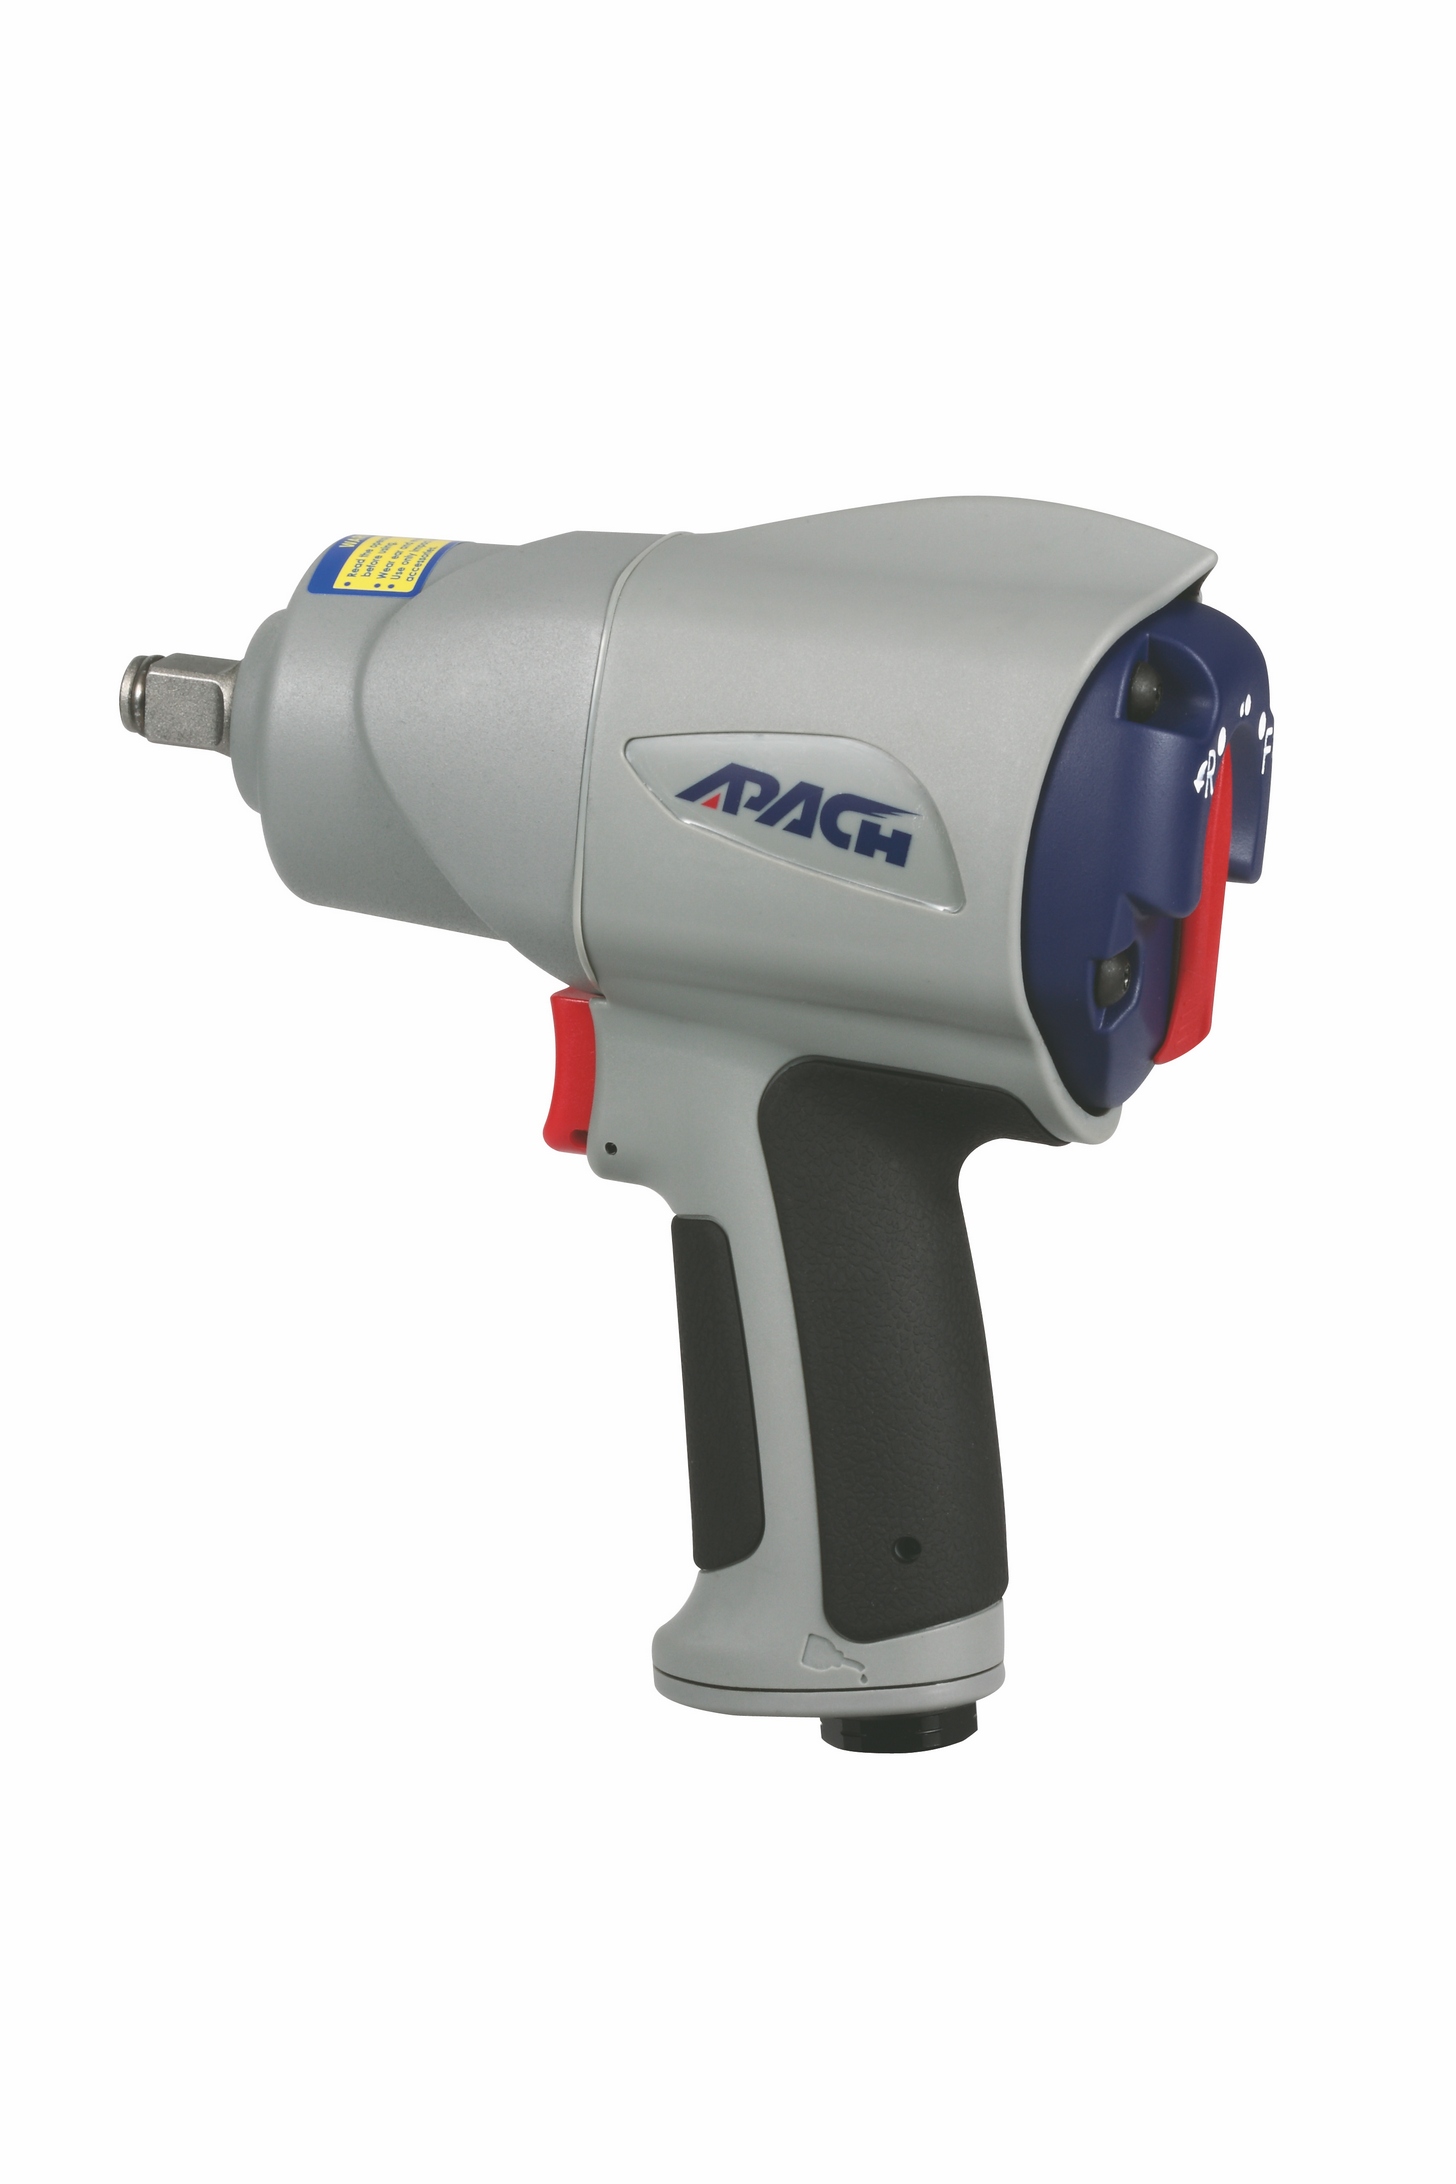 AW095A 1／2" Composite Air impact Wrench